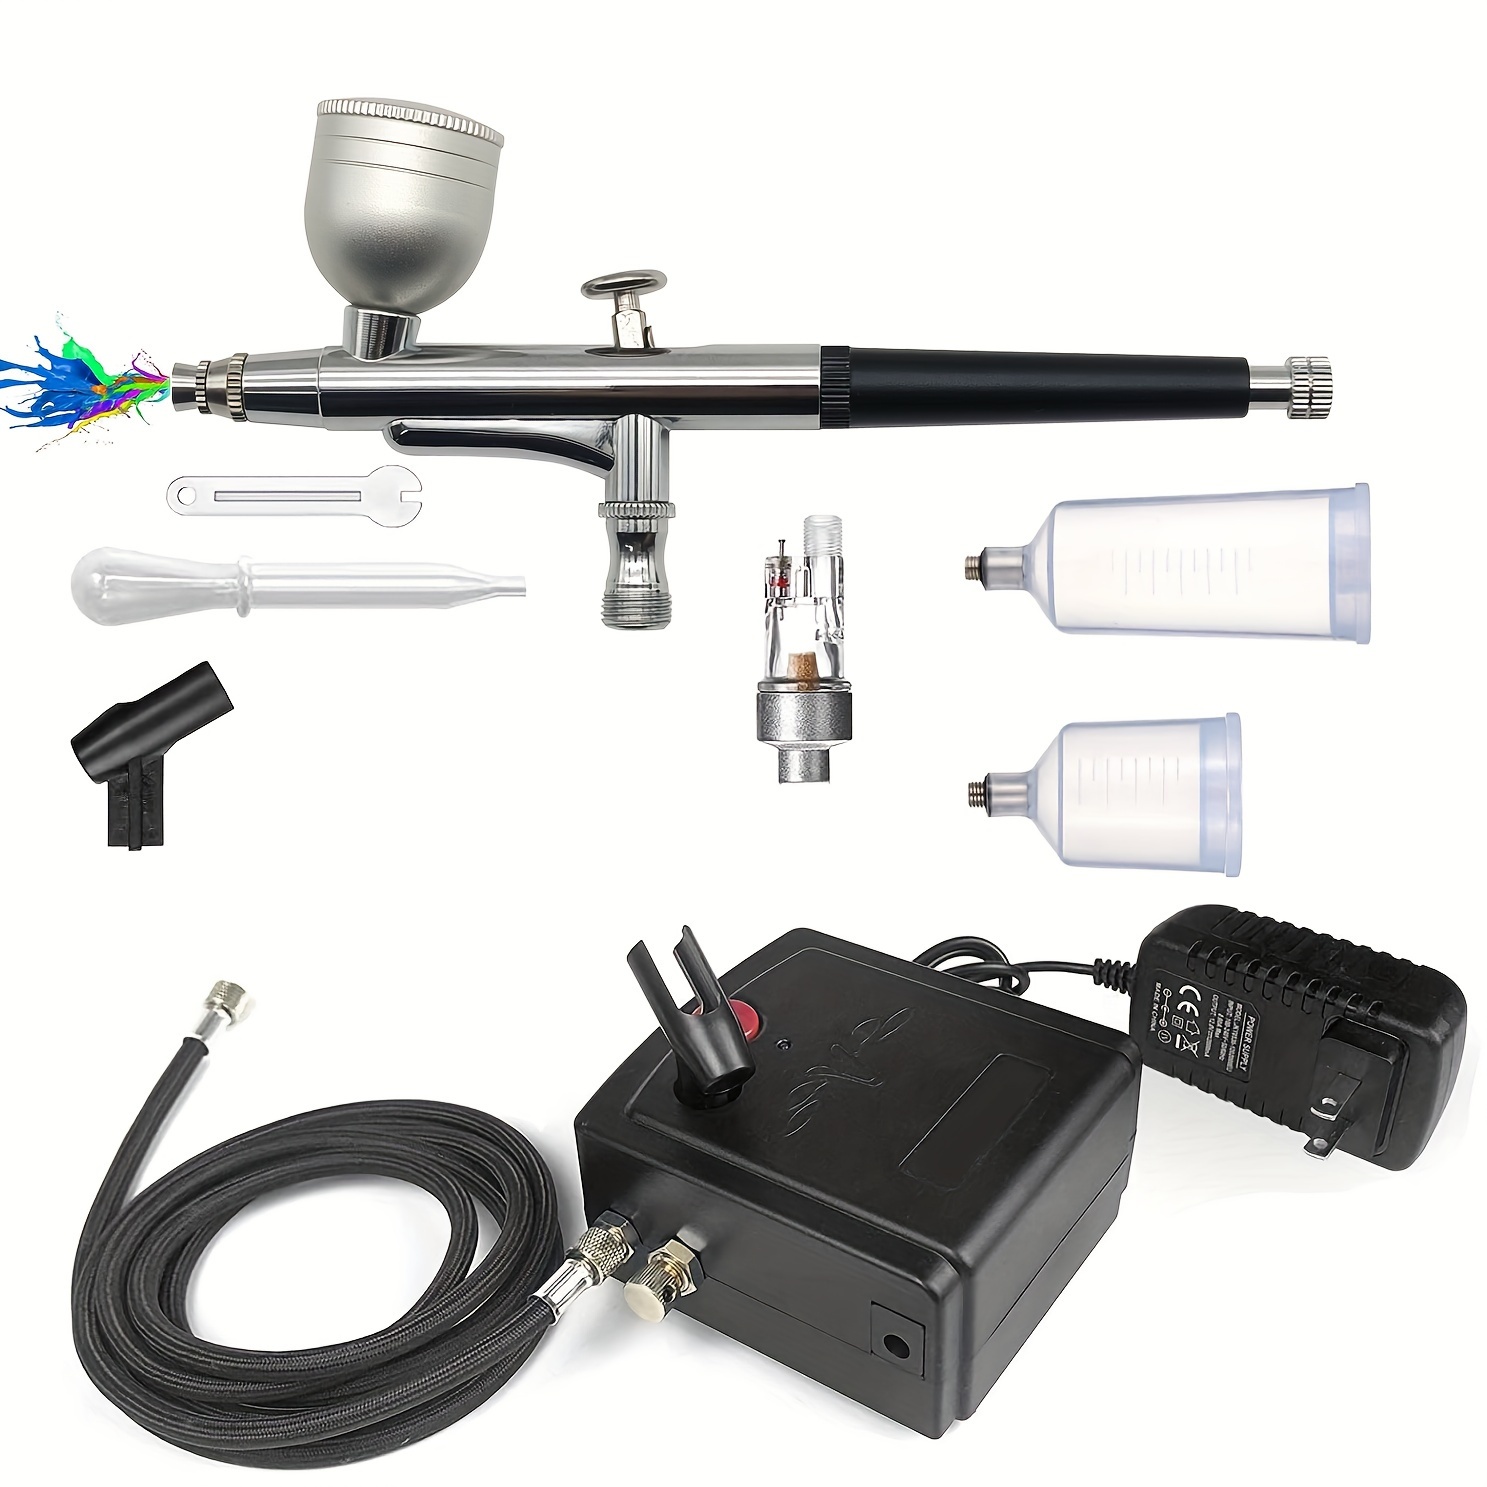 Airbrush Kit with Compressor, Air Brush Gun Rechargeable Portable High  Pressure Air Brushes with 0.3mm Nozzle and Cleaning Brush Set for Painting